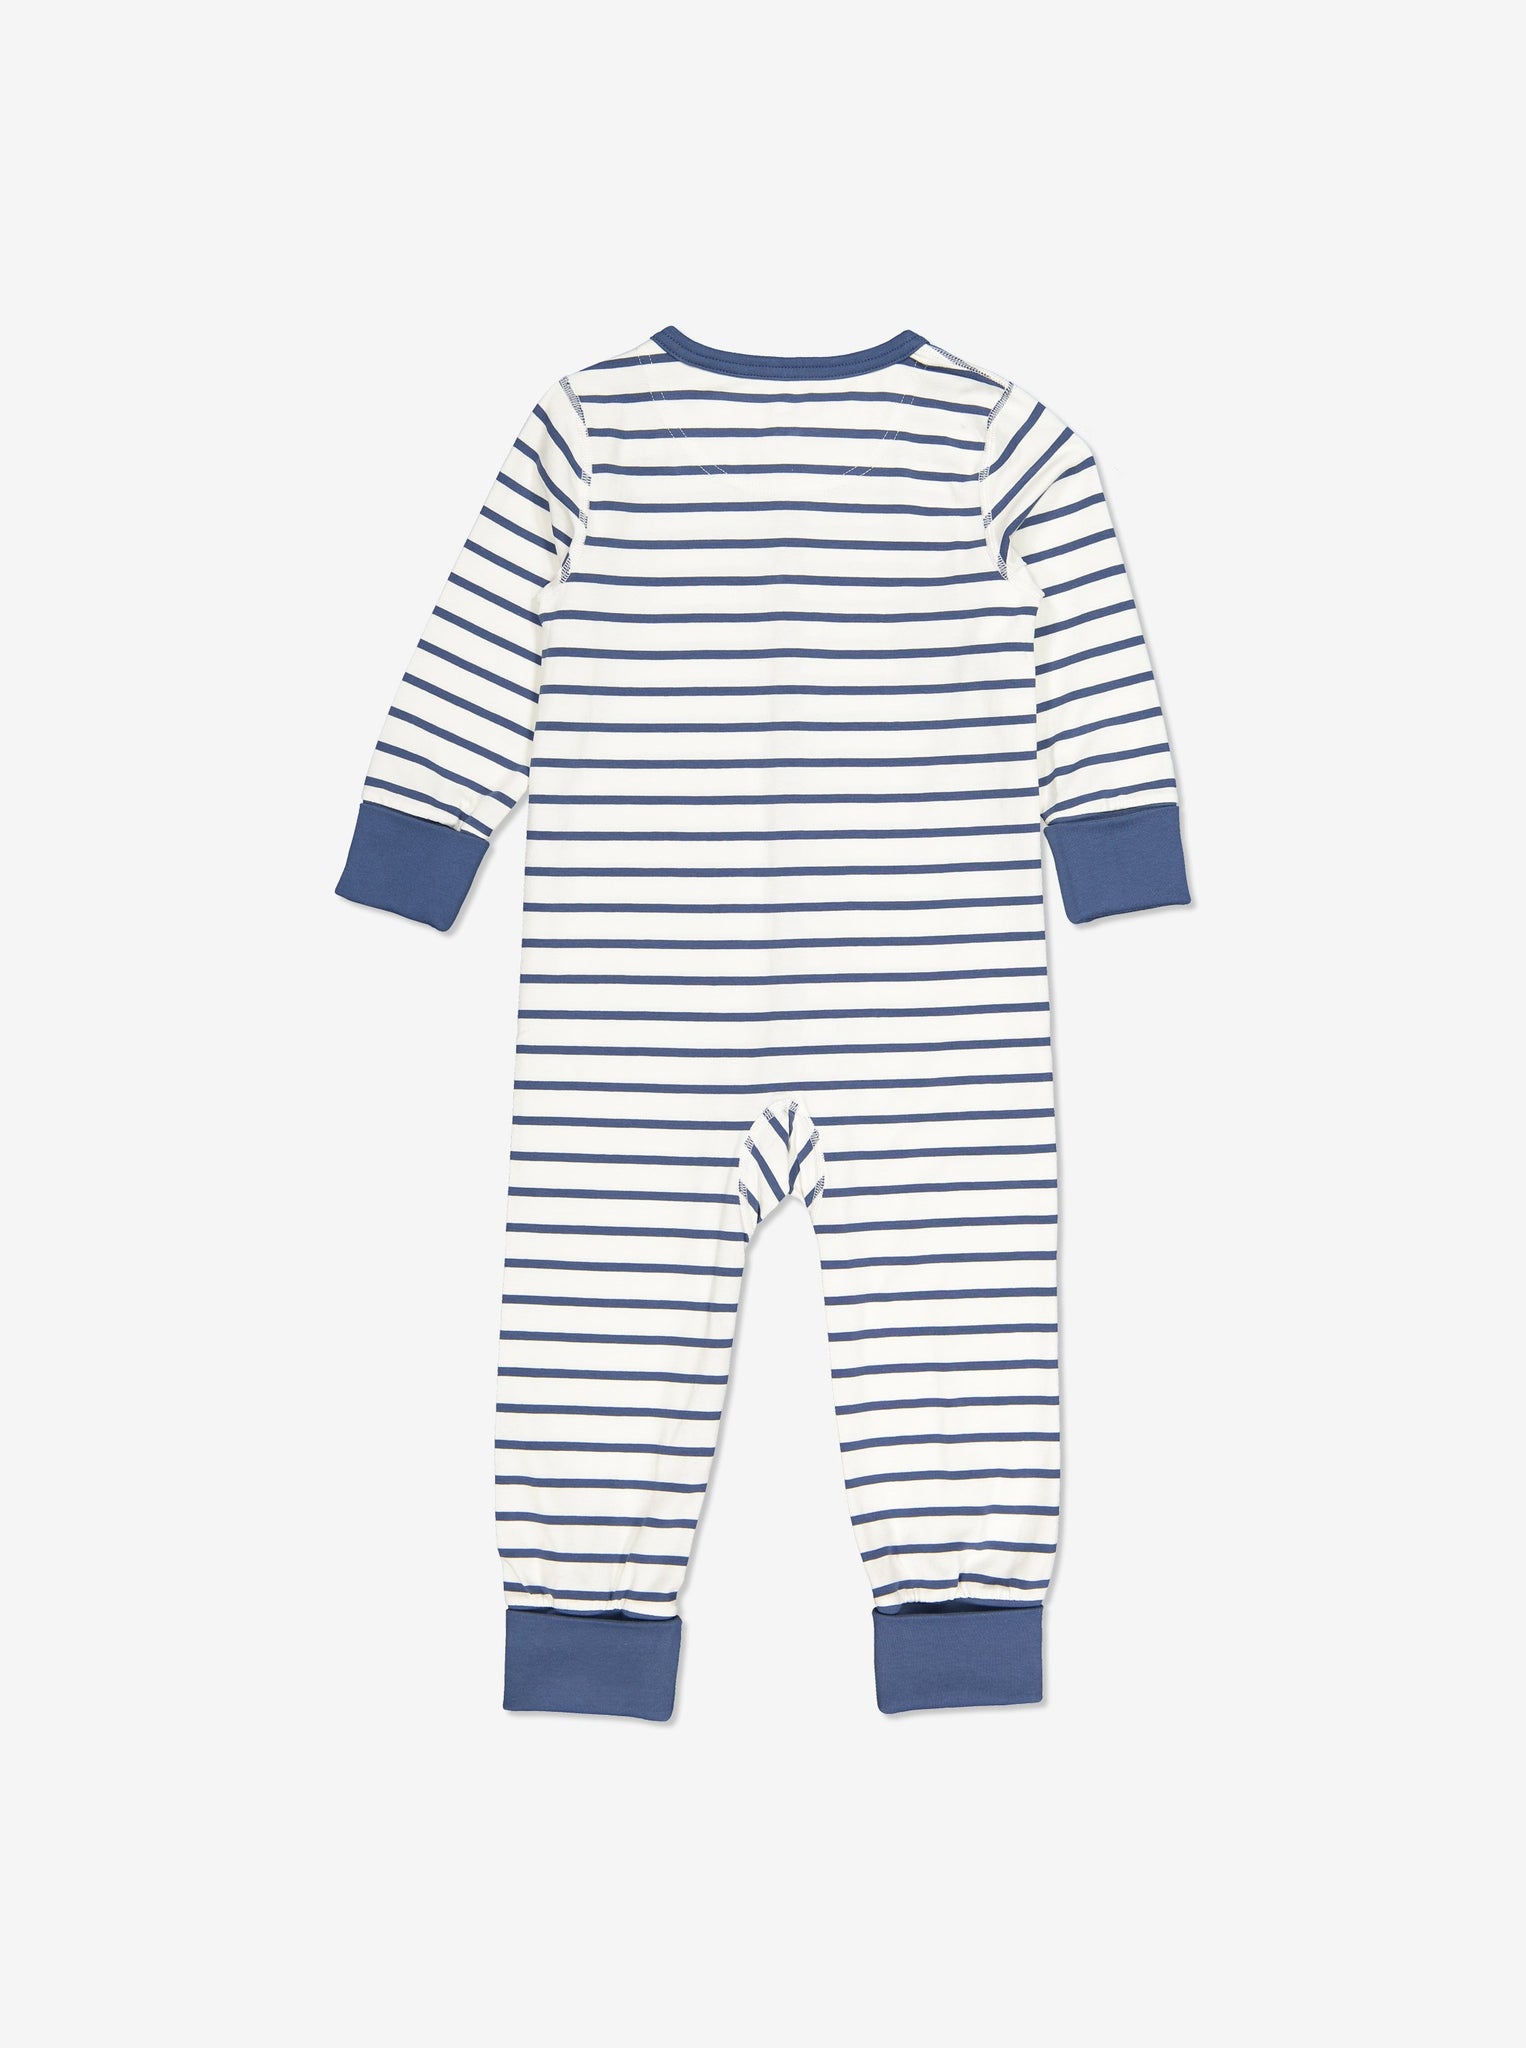 Onesie pyjamas for newborn to child, organic cotton womfortable and easy to use, ethical and long lasting polarn o. pyret